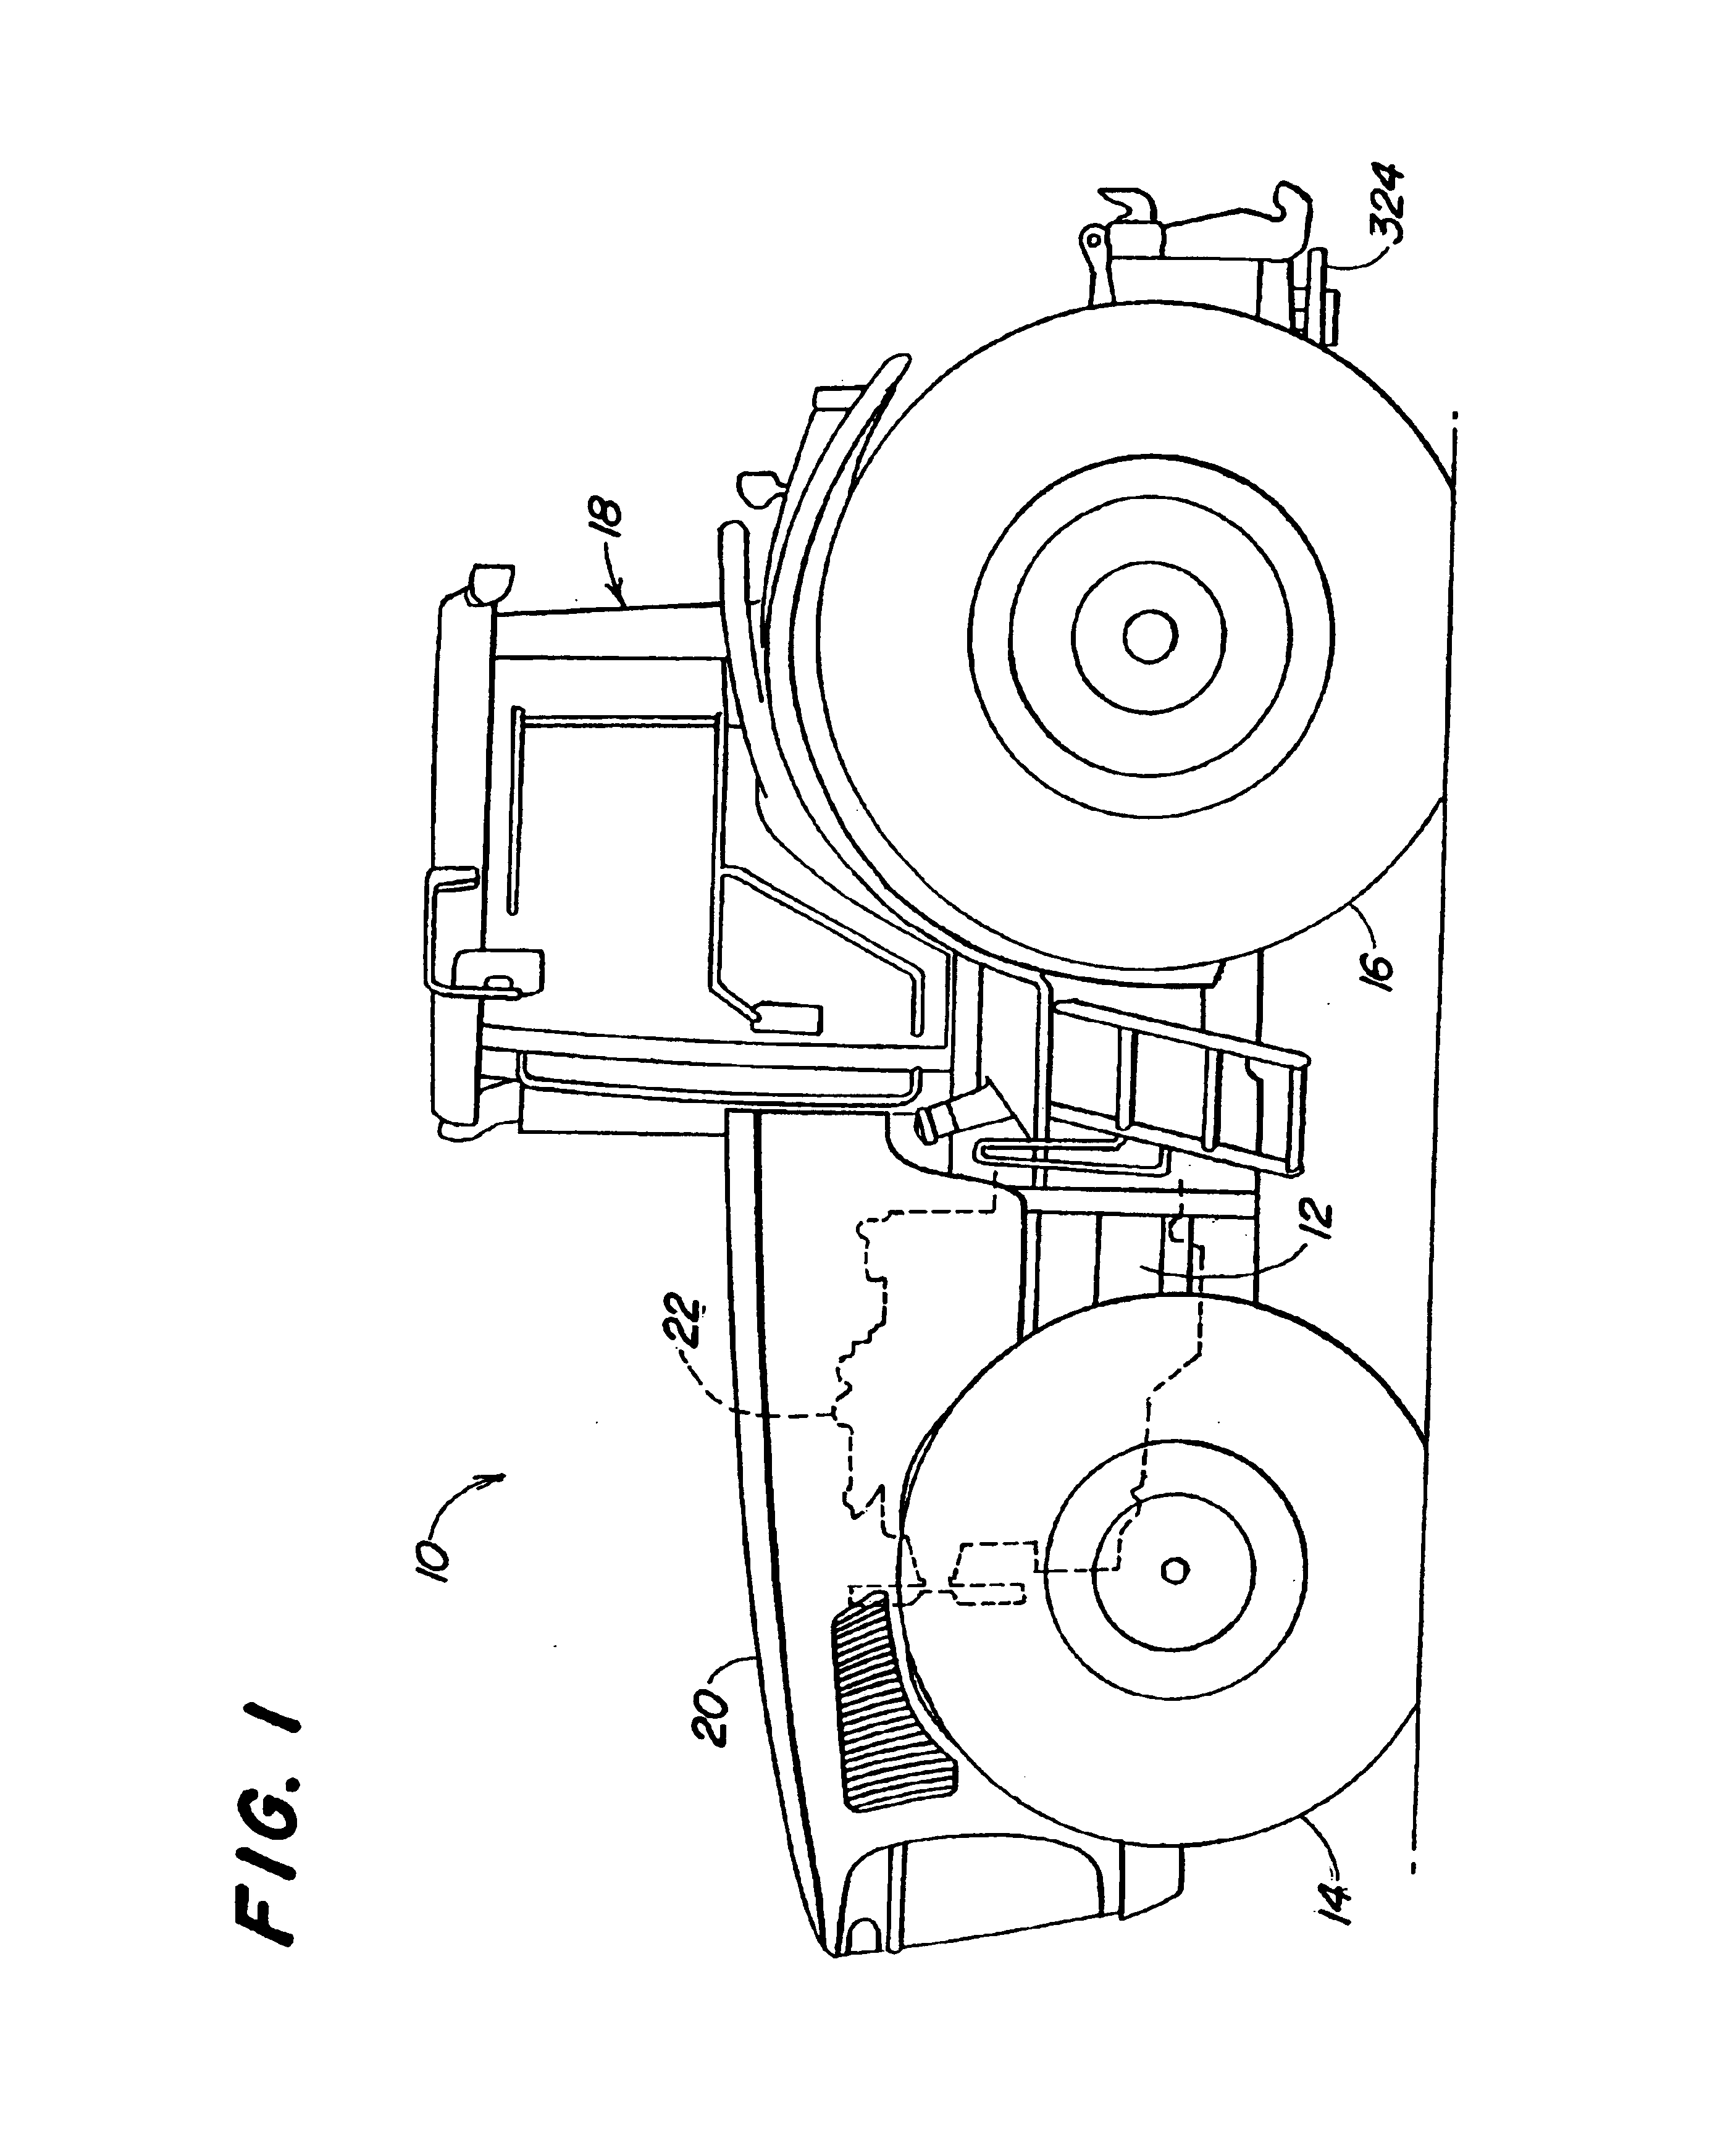 Suspended drive axle and agricultural tractor with same